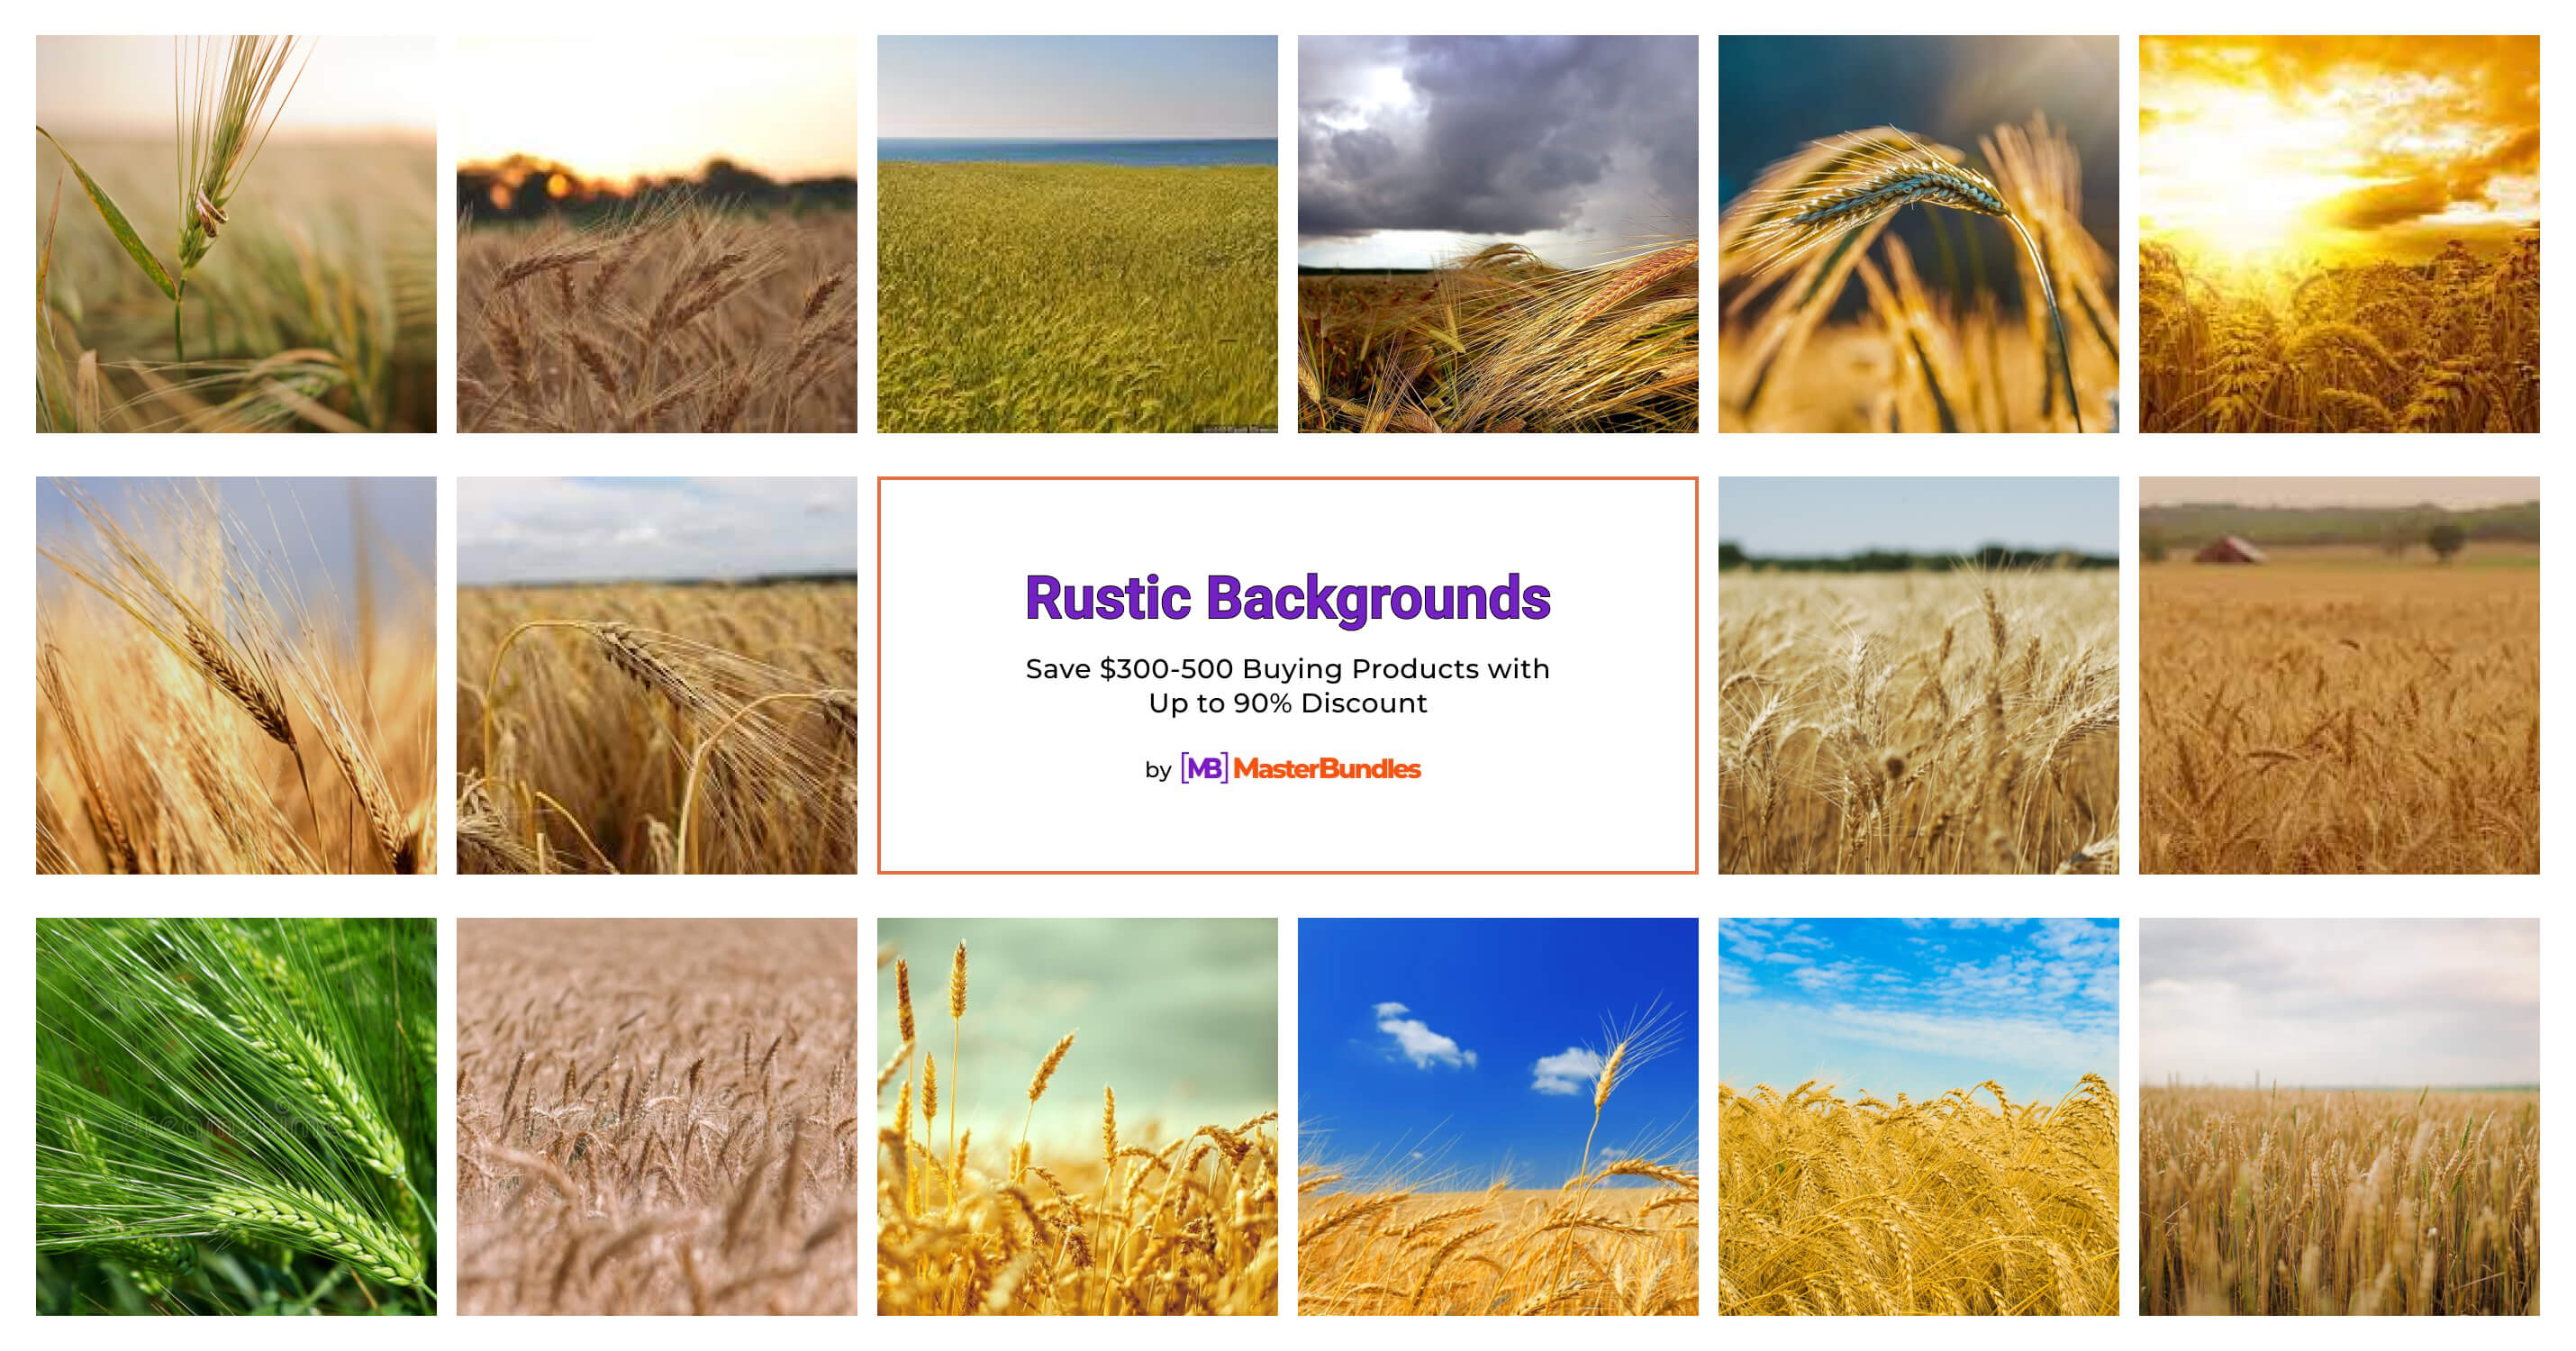 Rustic Backgrounds 1 